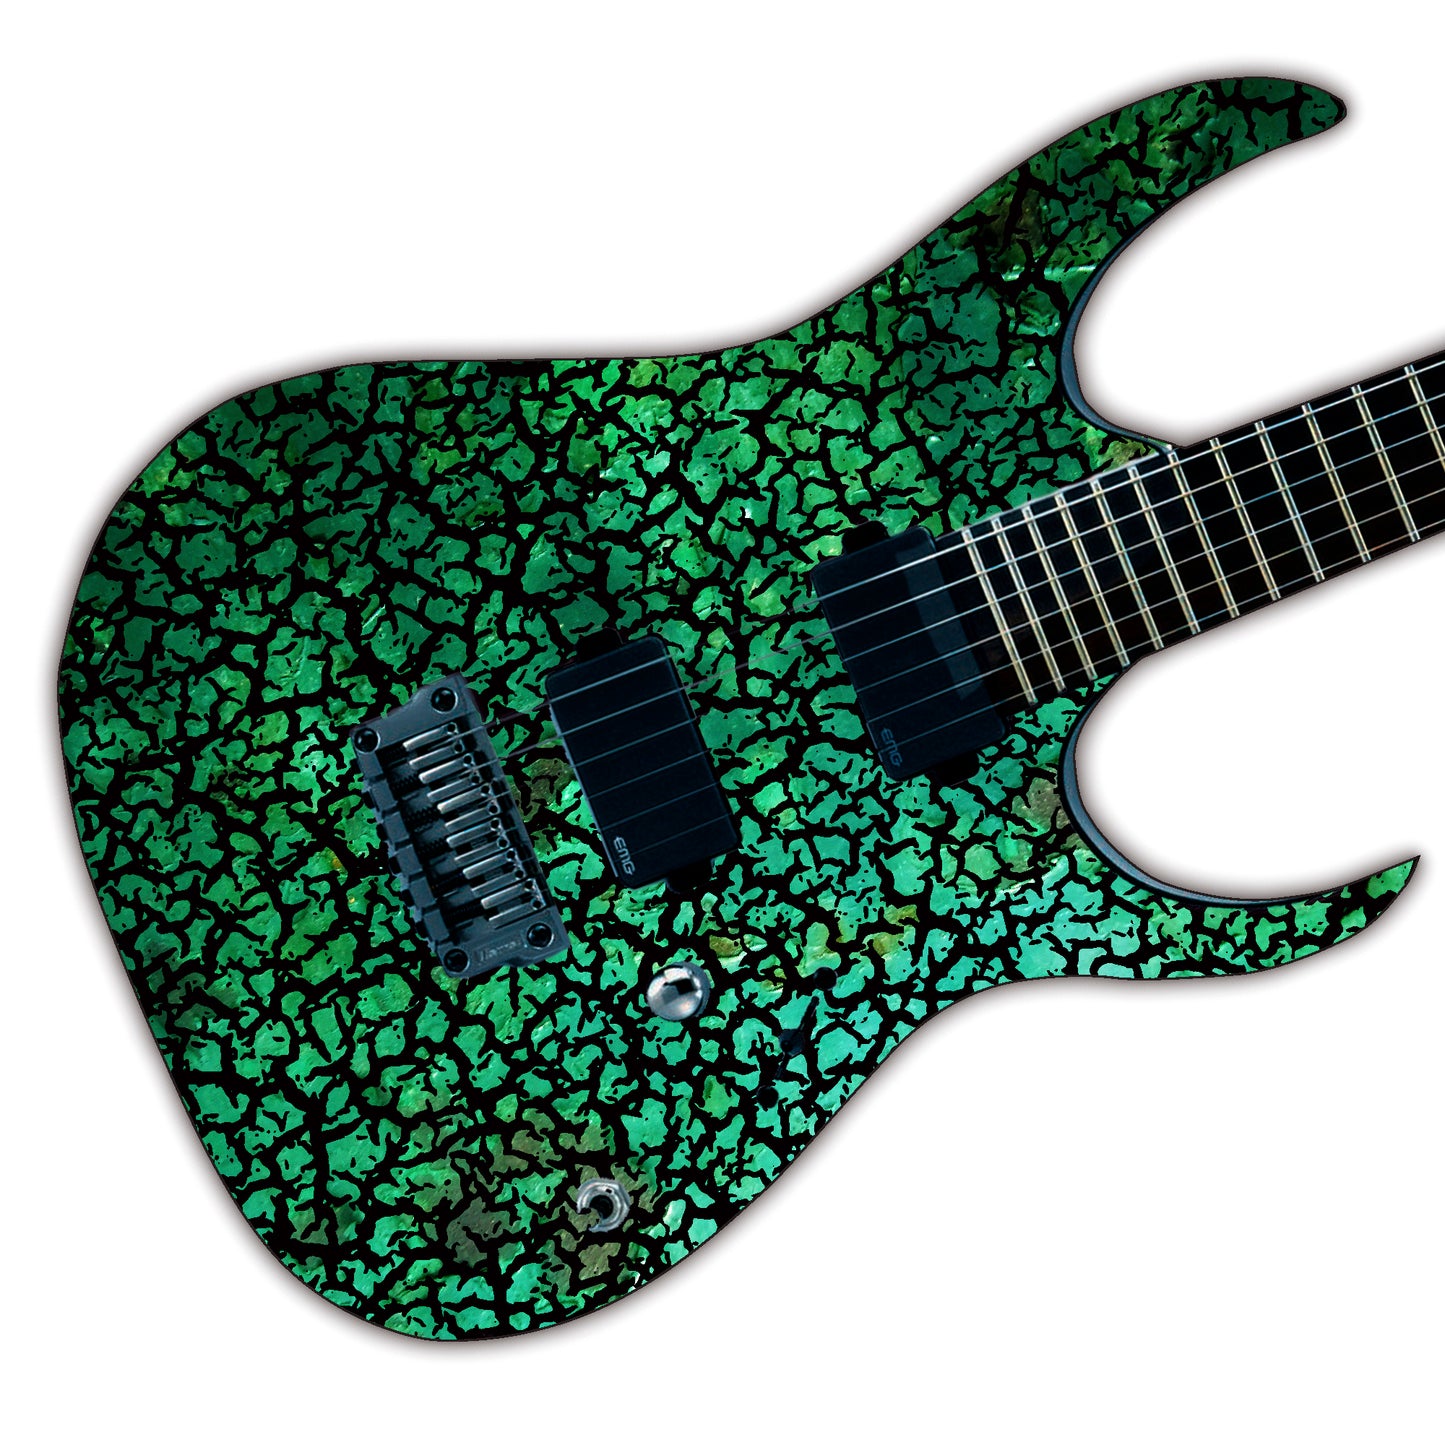 Copy of The Crackle Selection Guitar/Bass Vinyl Skin Wrap Decal Sticker Skin. Reptile GS200